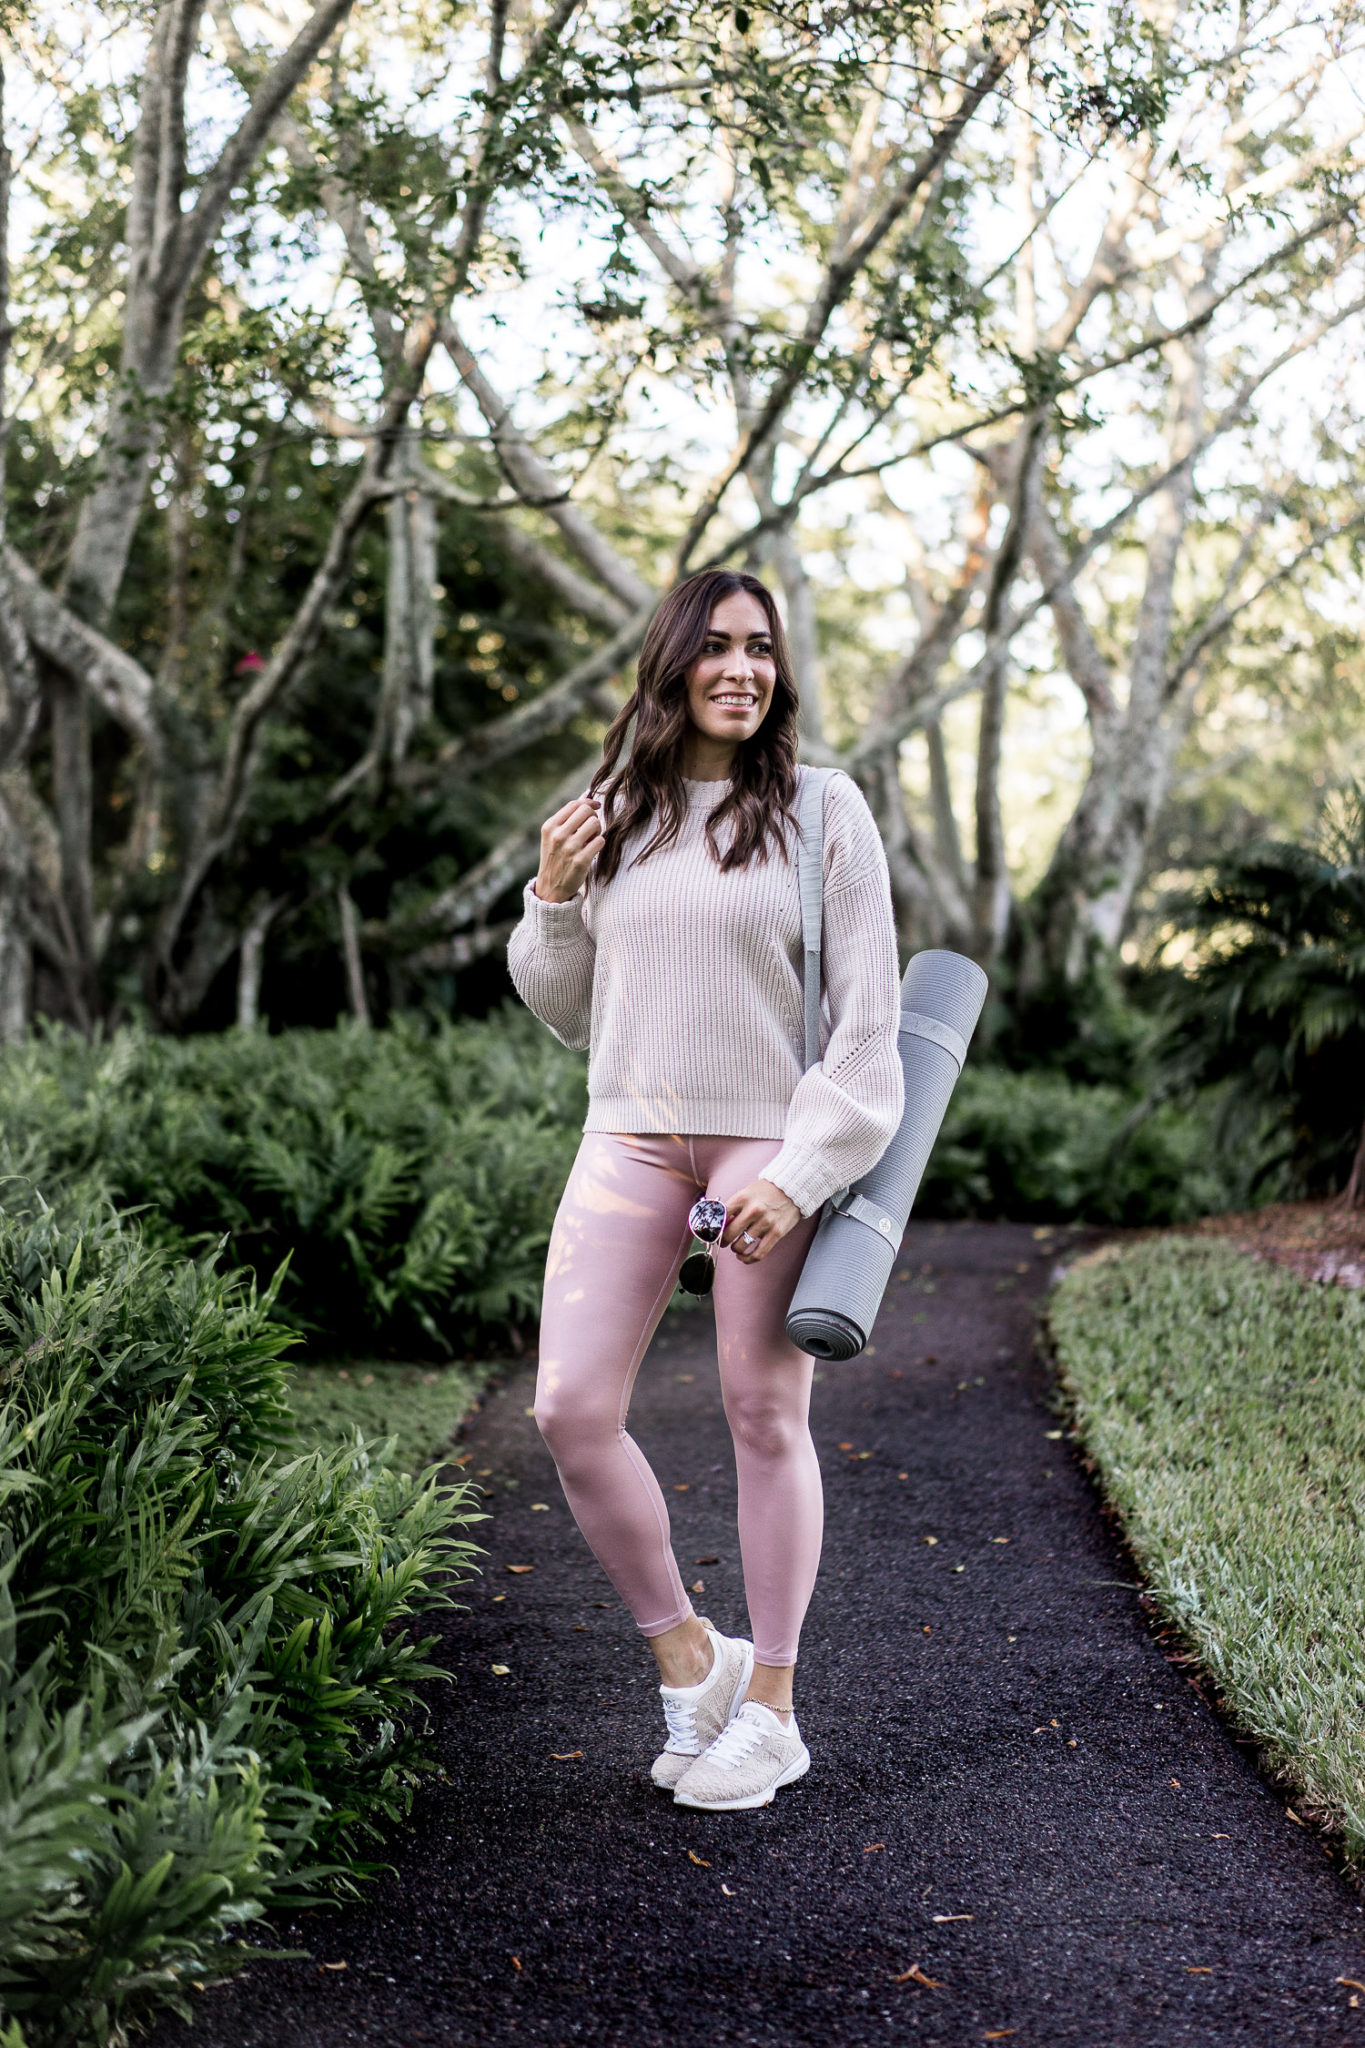 Amanda wears the elation shimmer athleta leggings with the cashmere lucca sweater for a cute athleisure outfit